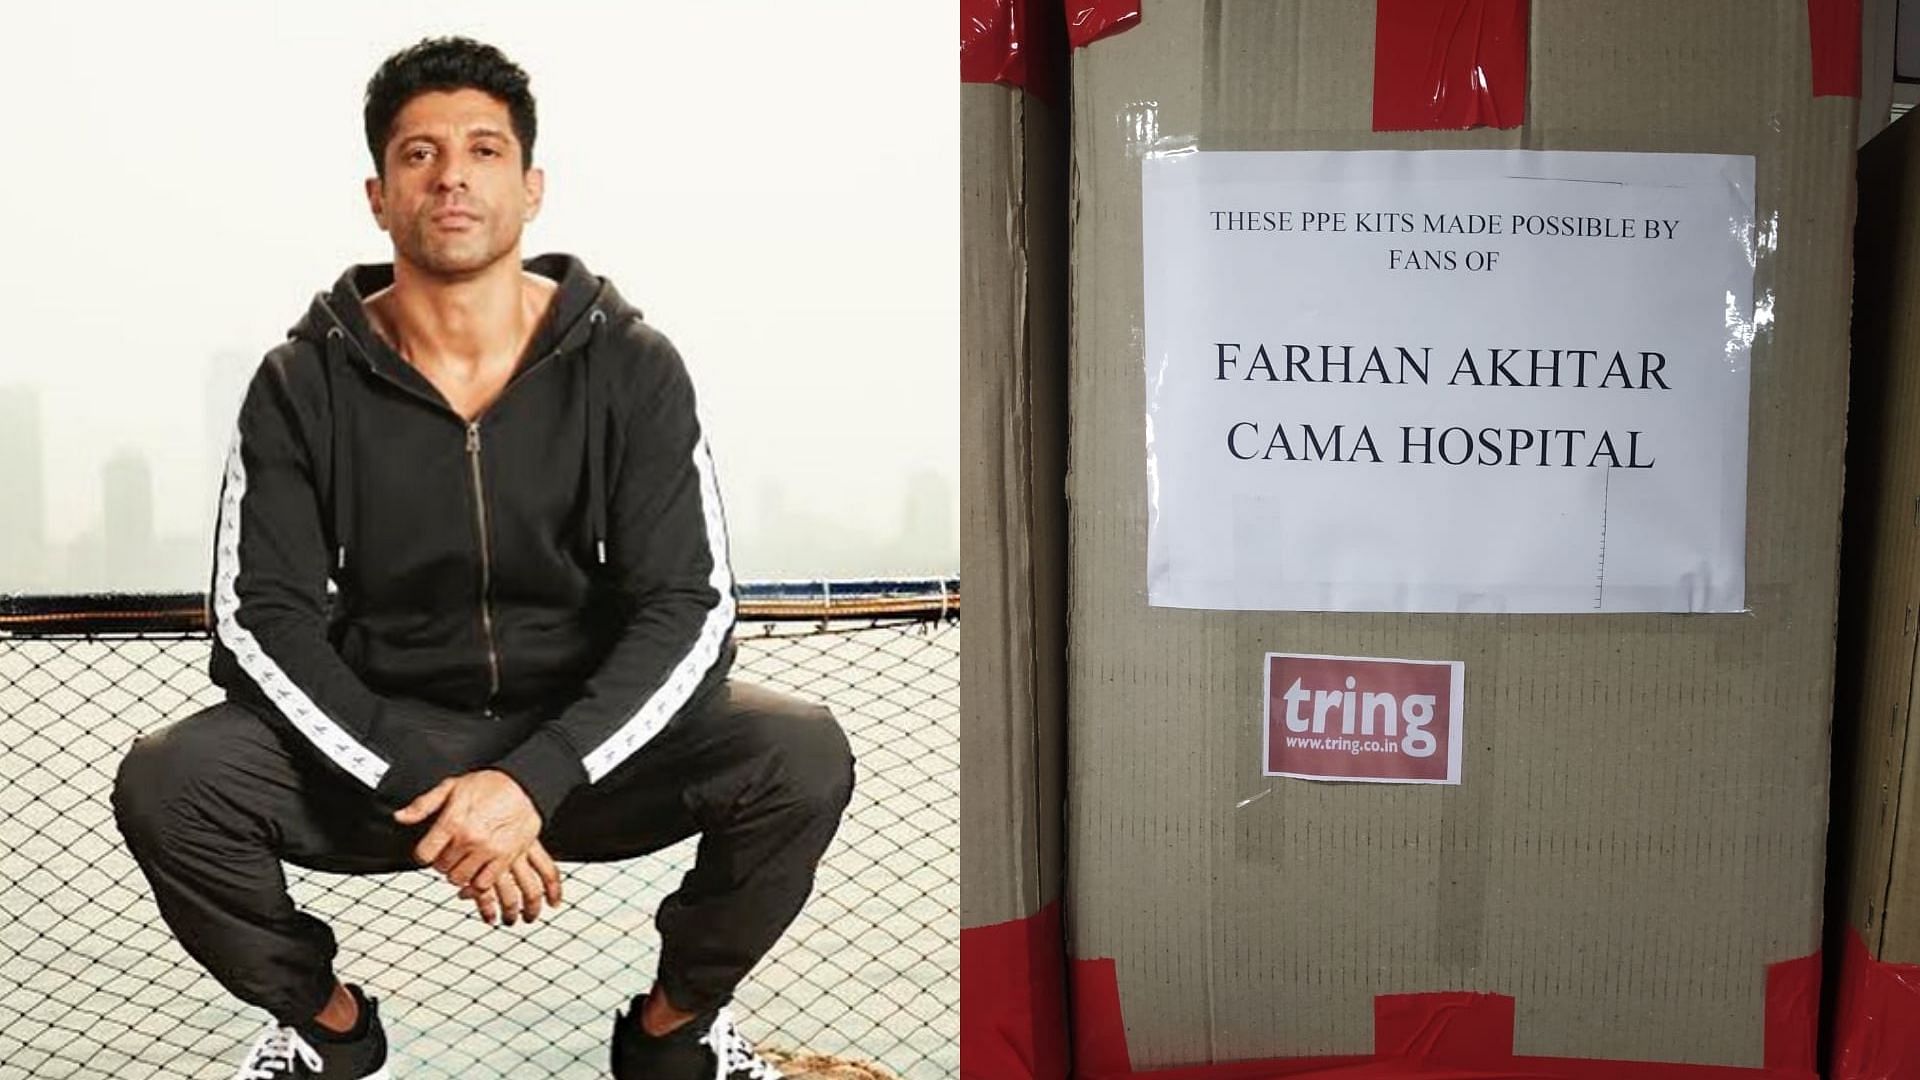 Farhan Akhtar donates PPE kits for frontline workers.&nbsp;